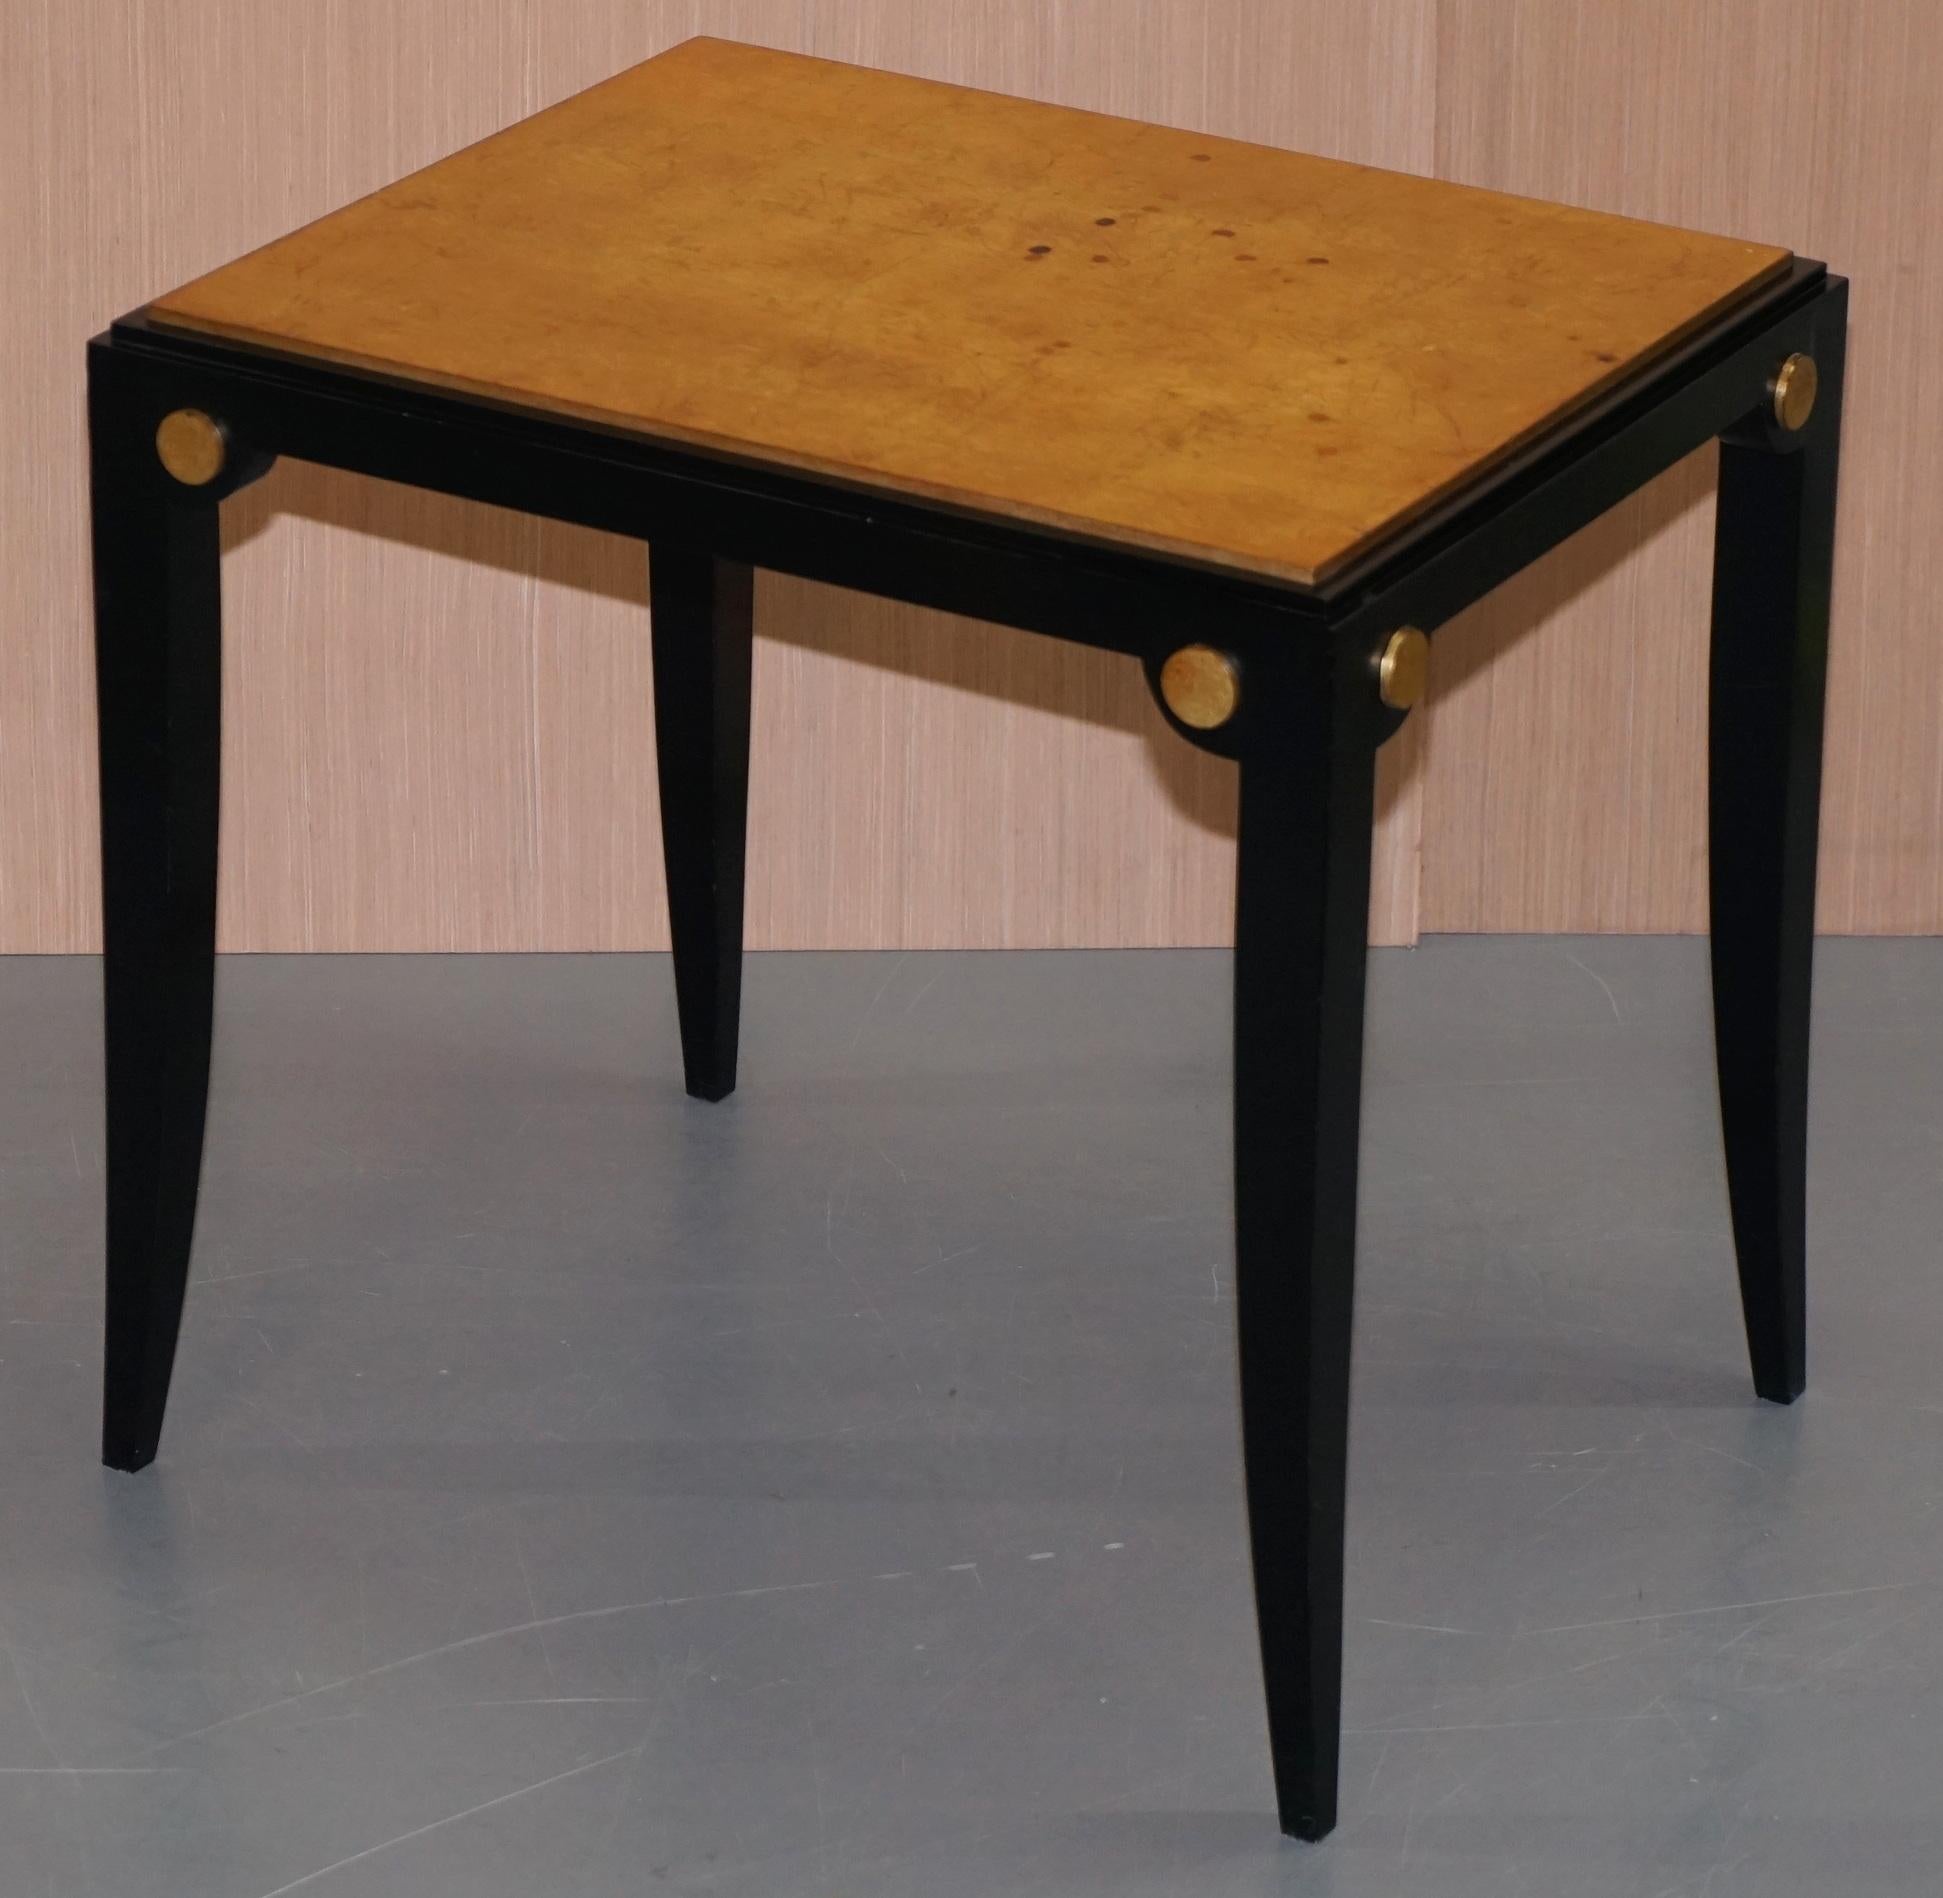 We are delighted to offer this pair of sublime bird's-eye maple ebonized side tables with gold leaf painted tops

These tables came from a client of mine who has recently sold one of their Chelsea homes, they had the house set up approximately 20